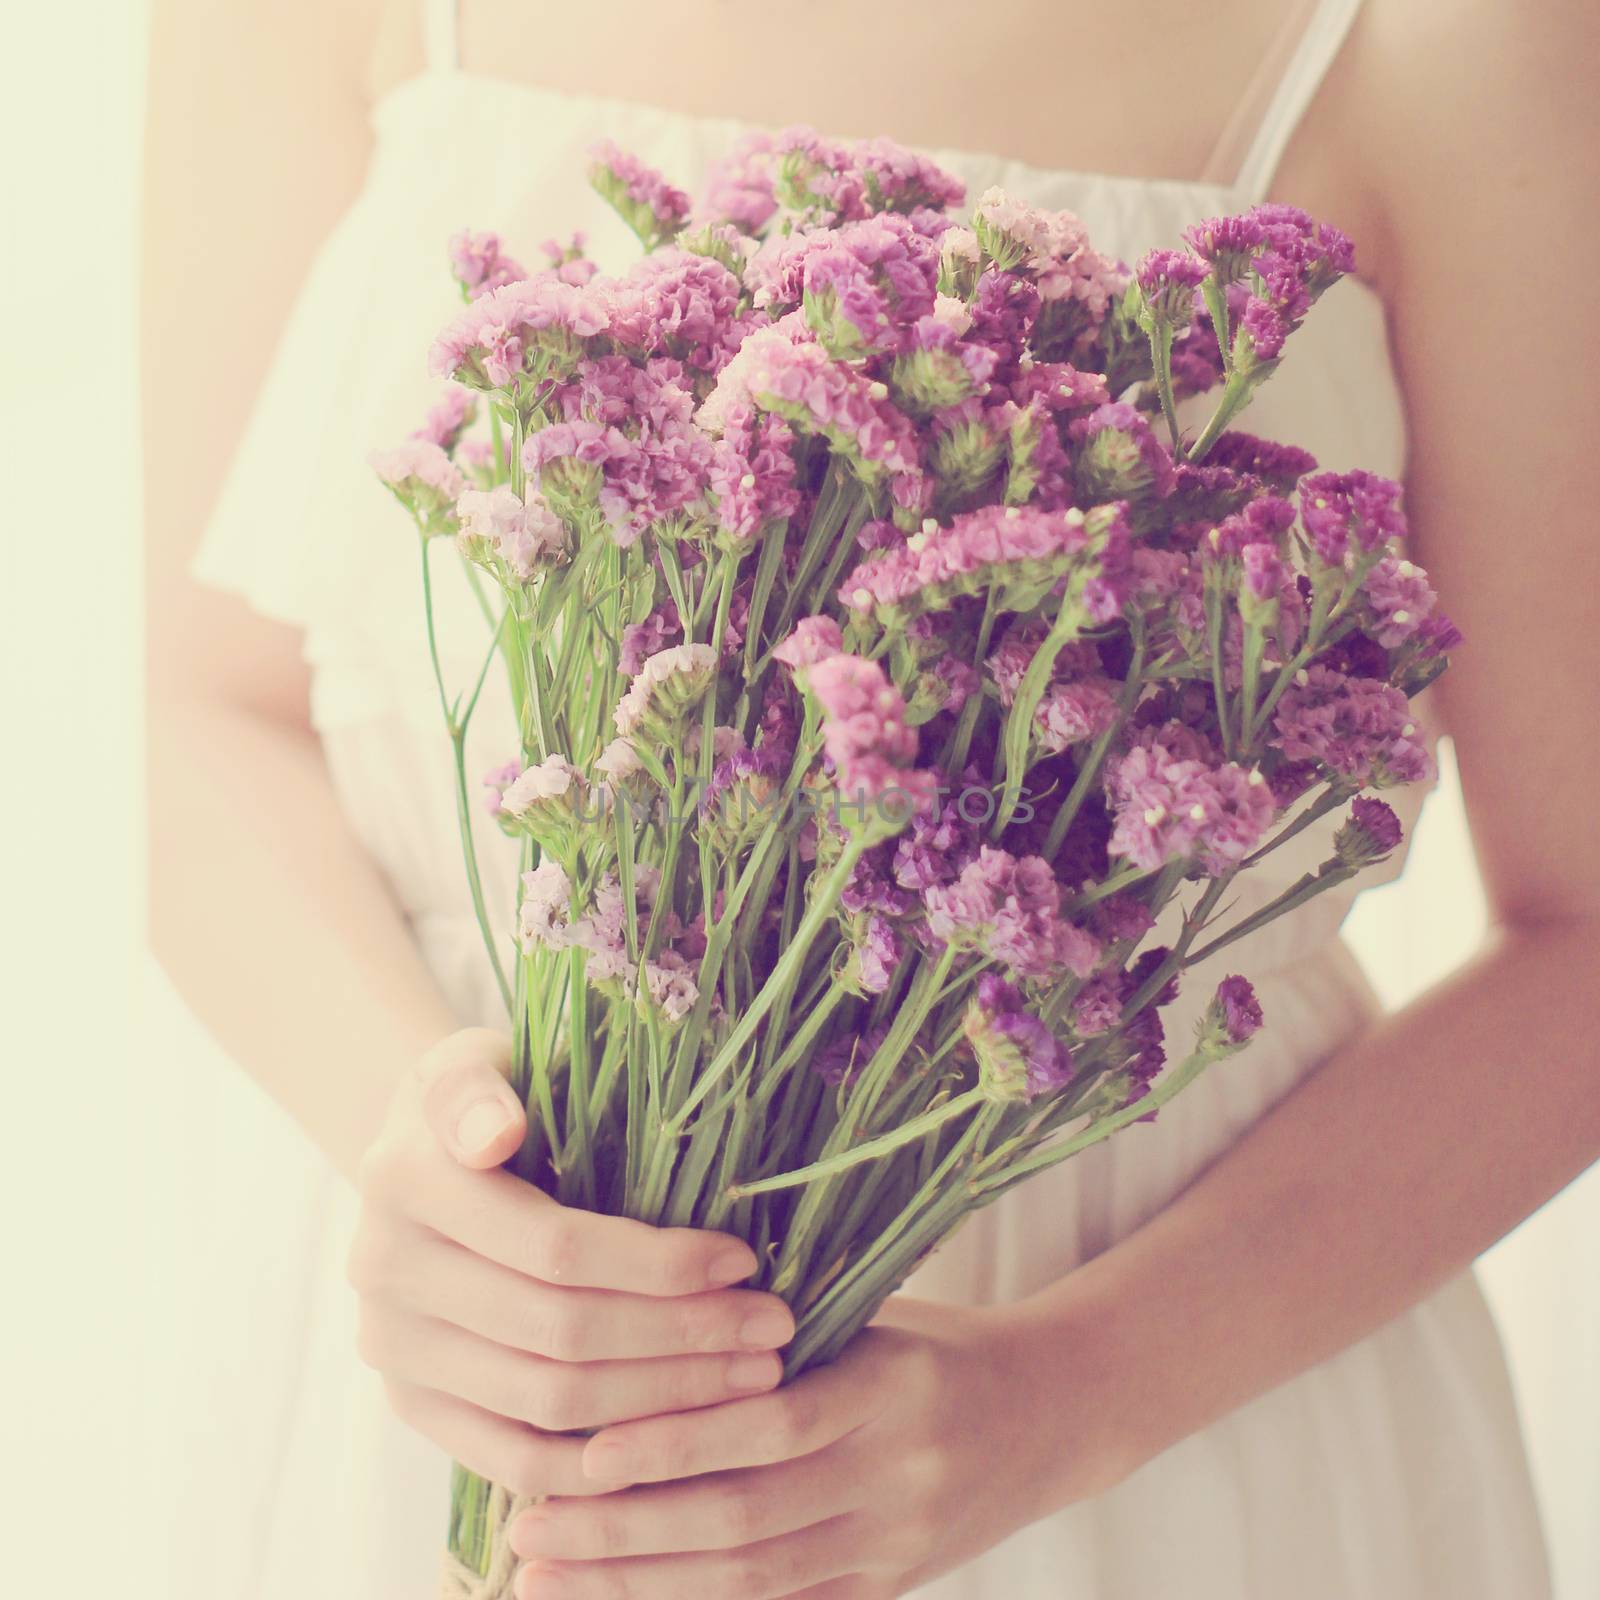 Bride or bridemaid with bouquet, closeup with retro filter effec by nuchylee